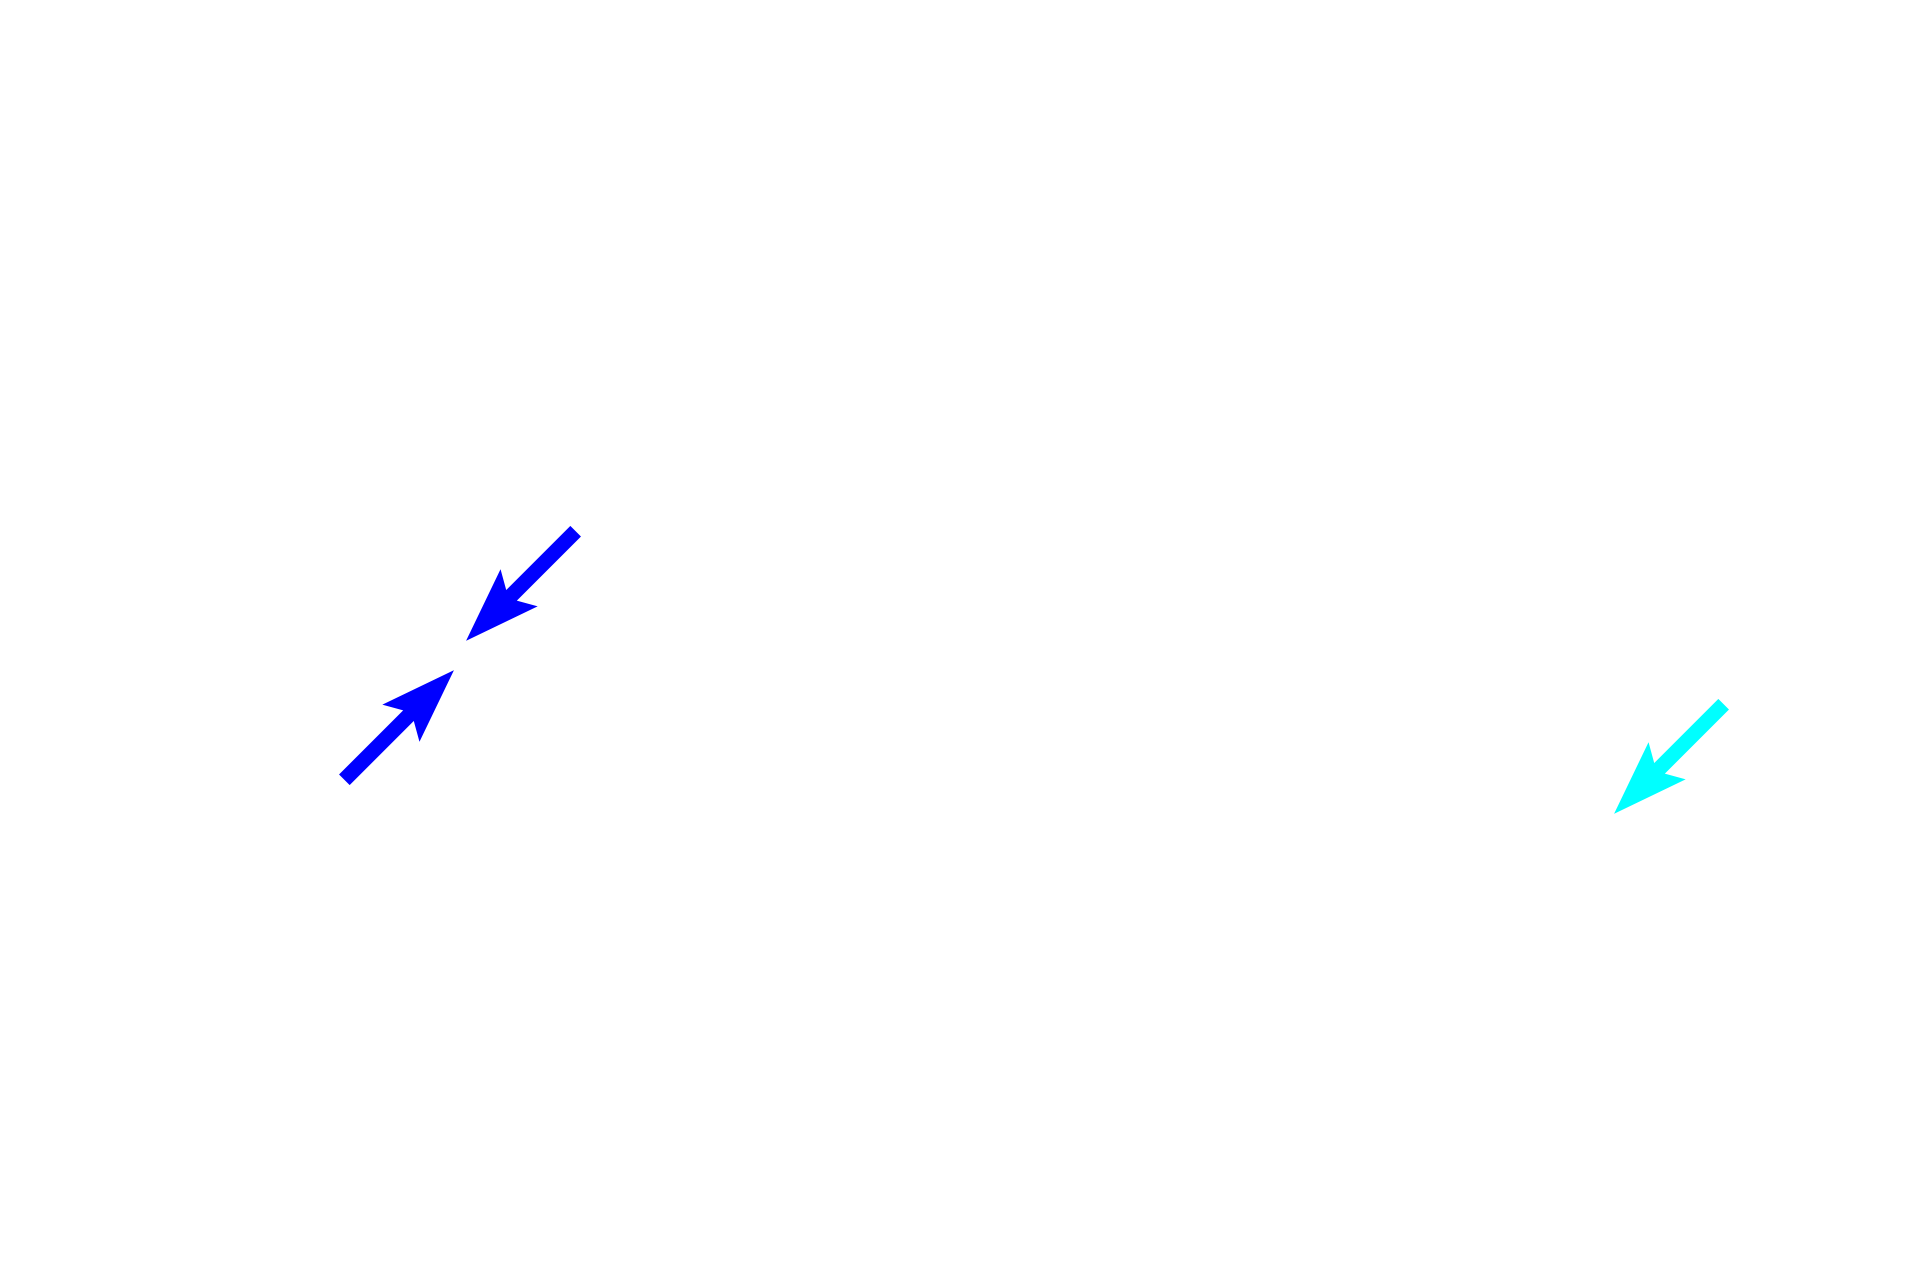 Sister chromatids <p>During metaphase, sister chromatids align at the metaphase plate (equatorial plate), midway between the poles.  Formation of the mitotic spindle is completed.</p>
